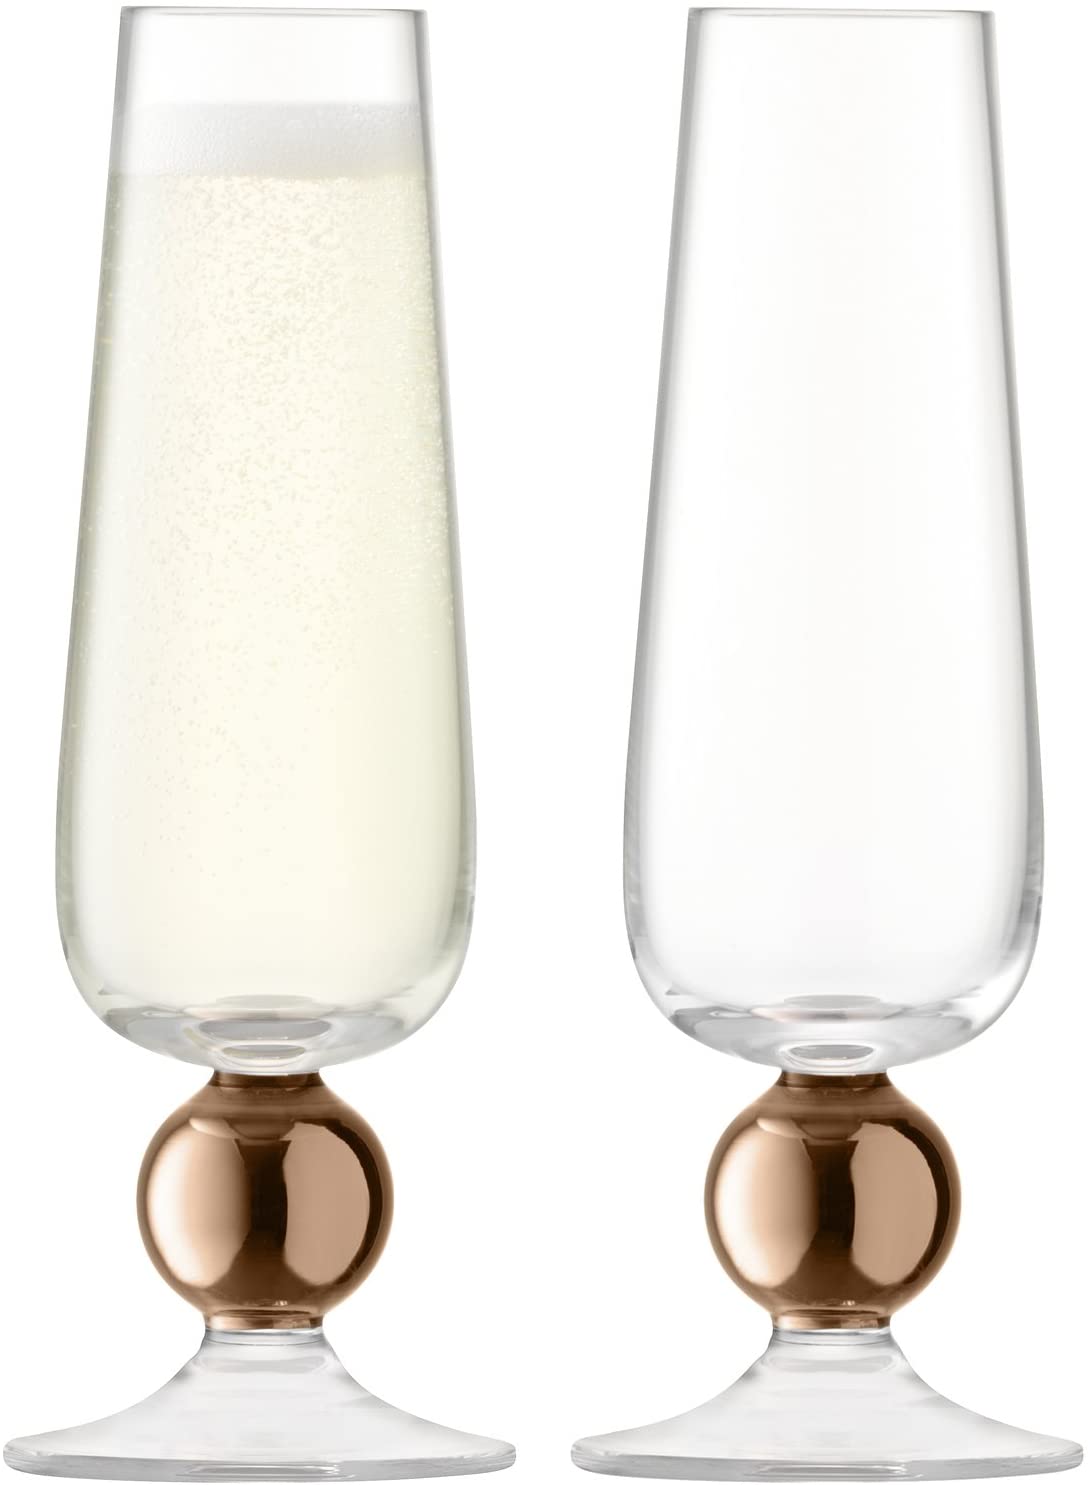 LSA International Oro Champagne Flute – Rose Gold/Clear, 8 oz – Pack of 2